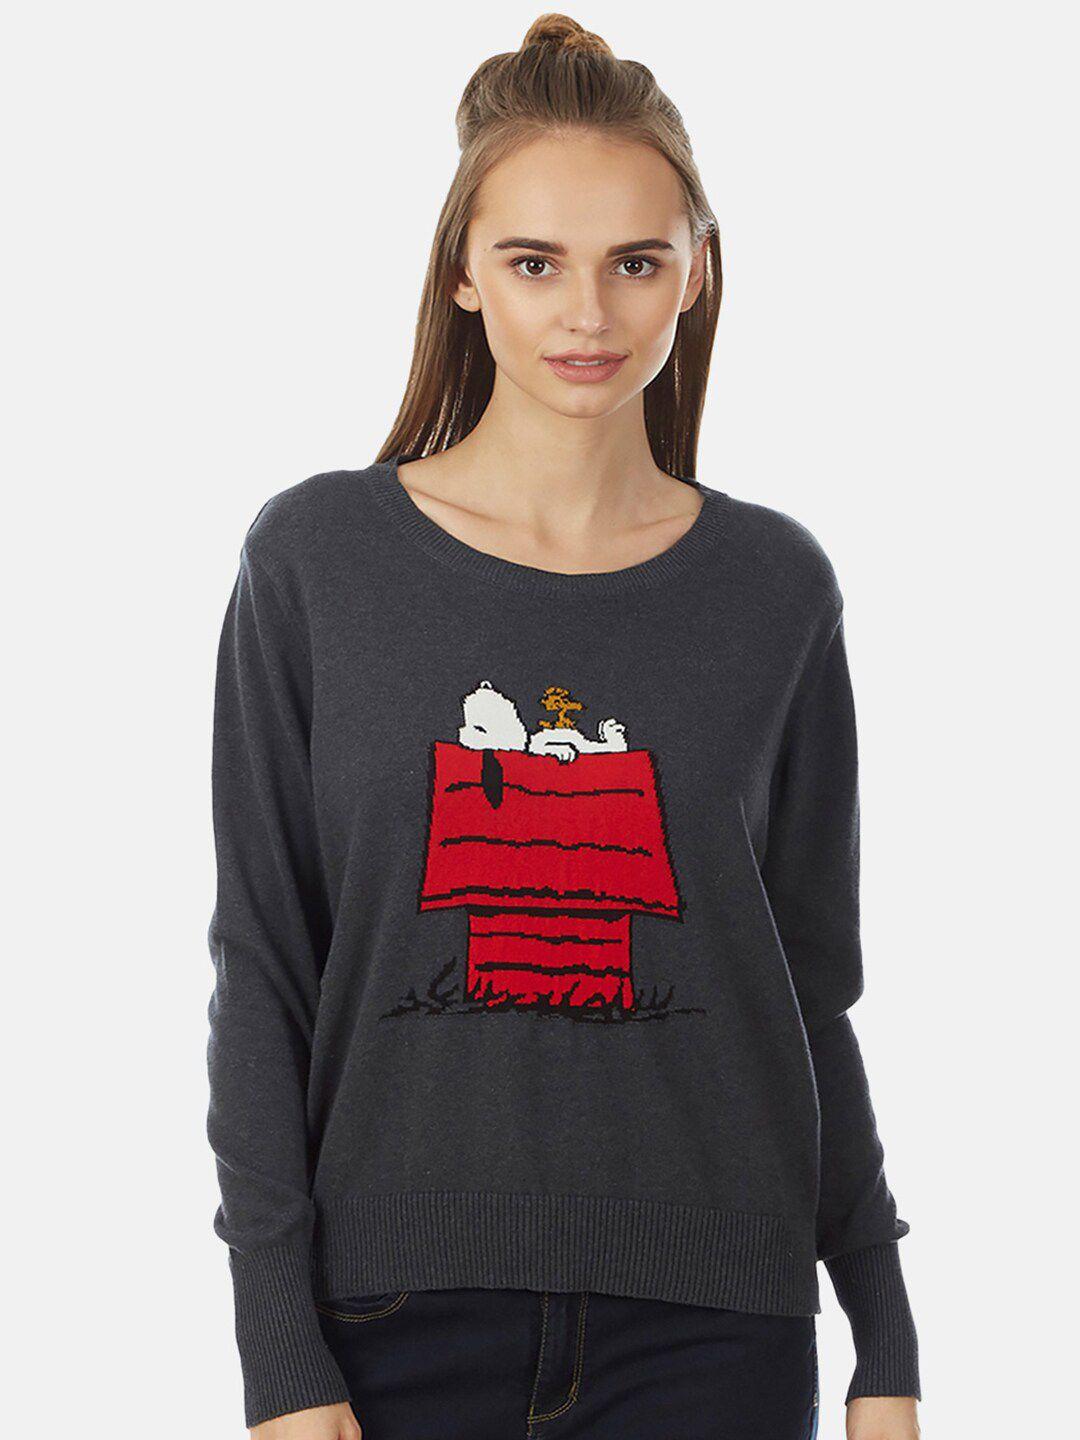 free authority women grey & red peanuts printed cotton pullover sweater